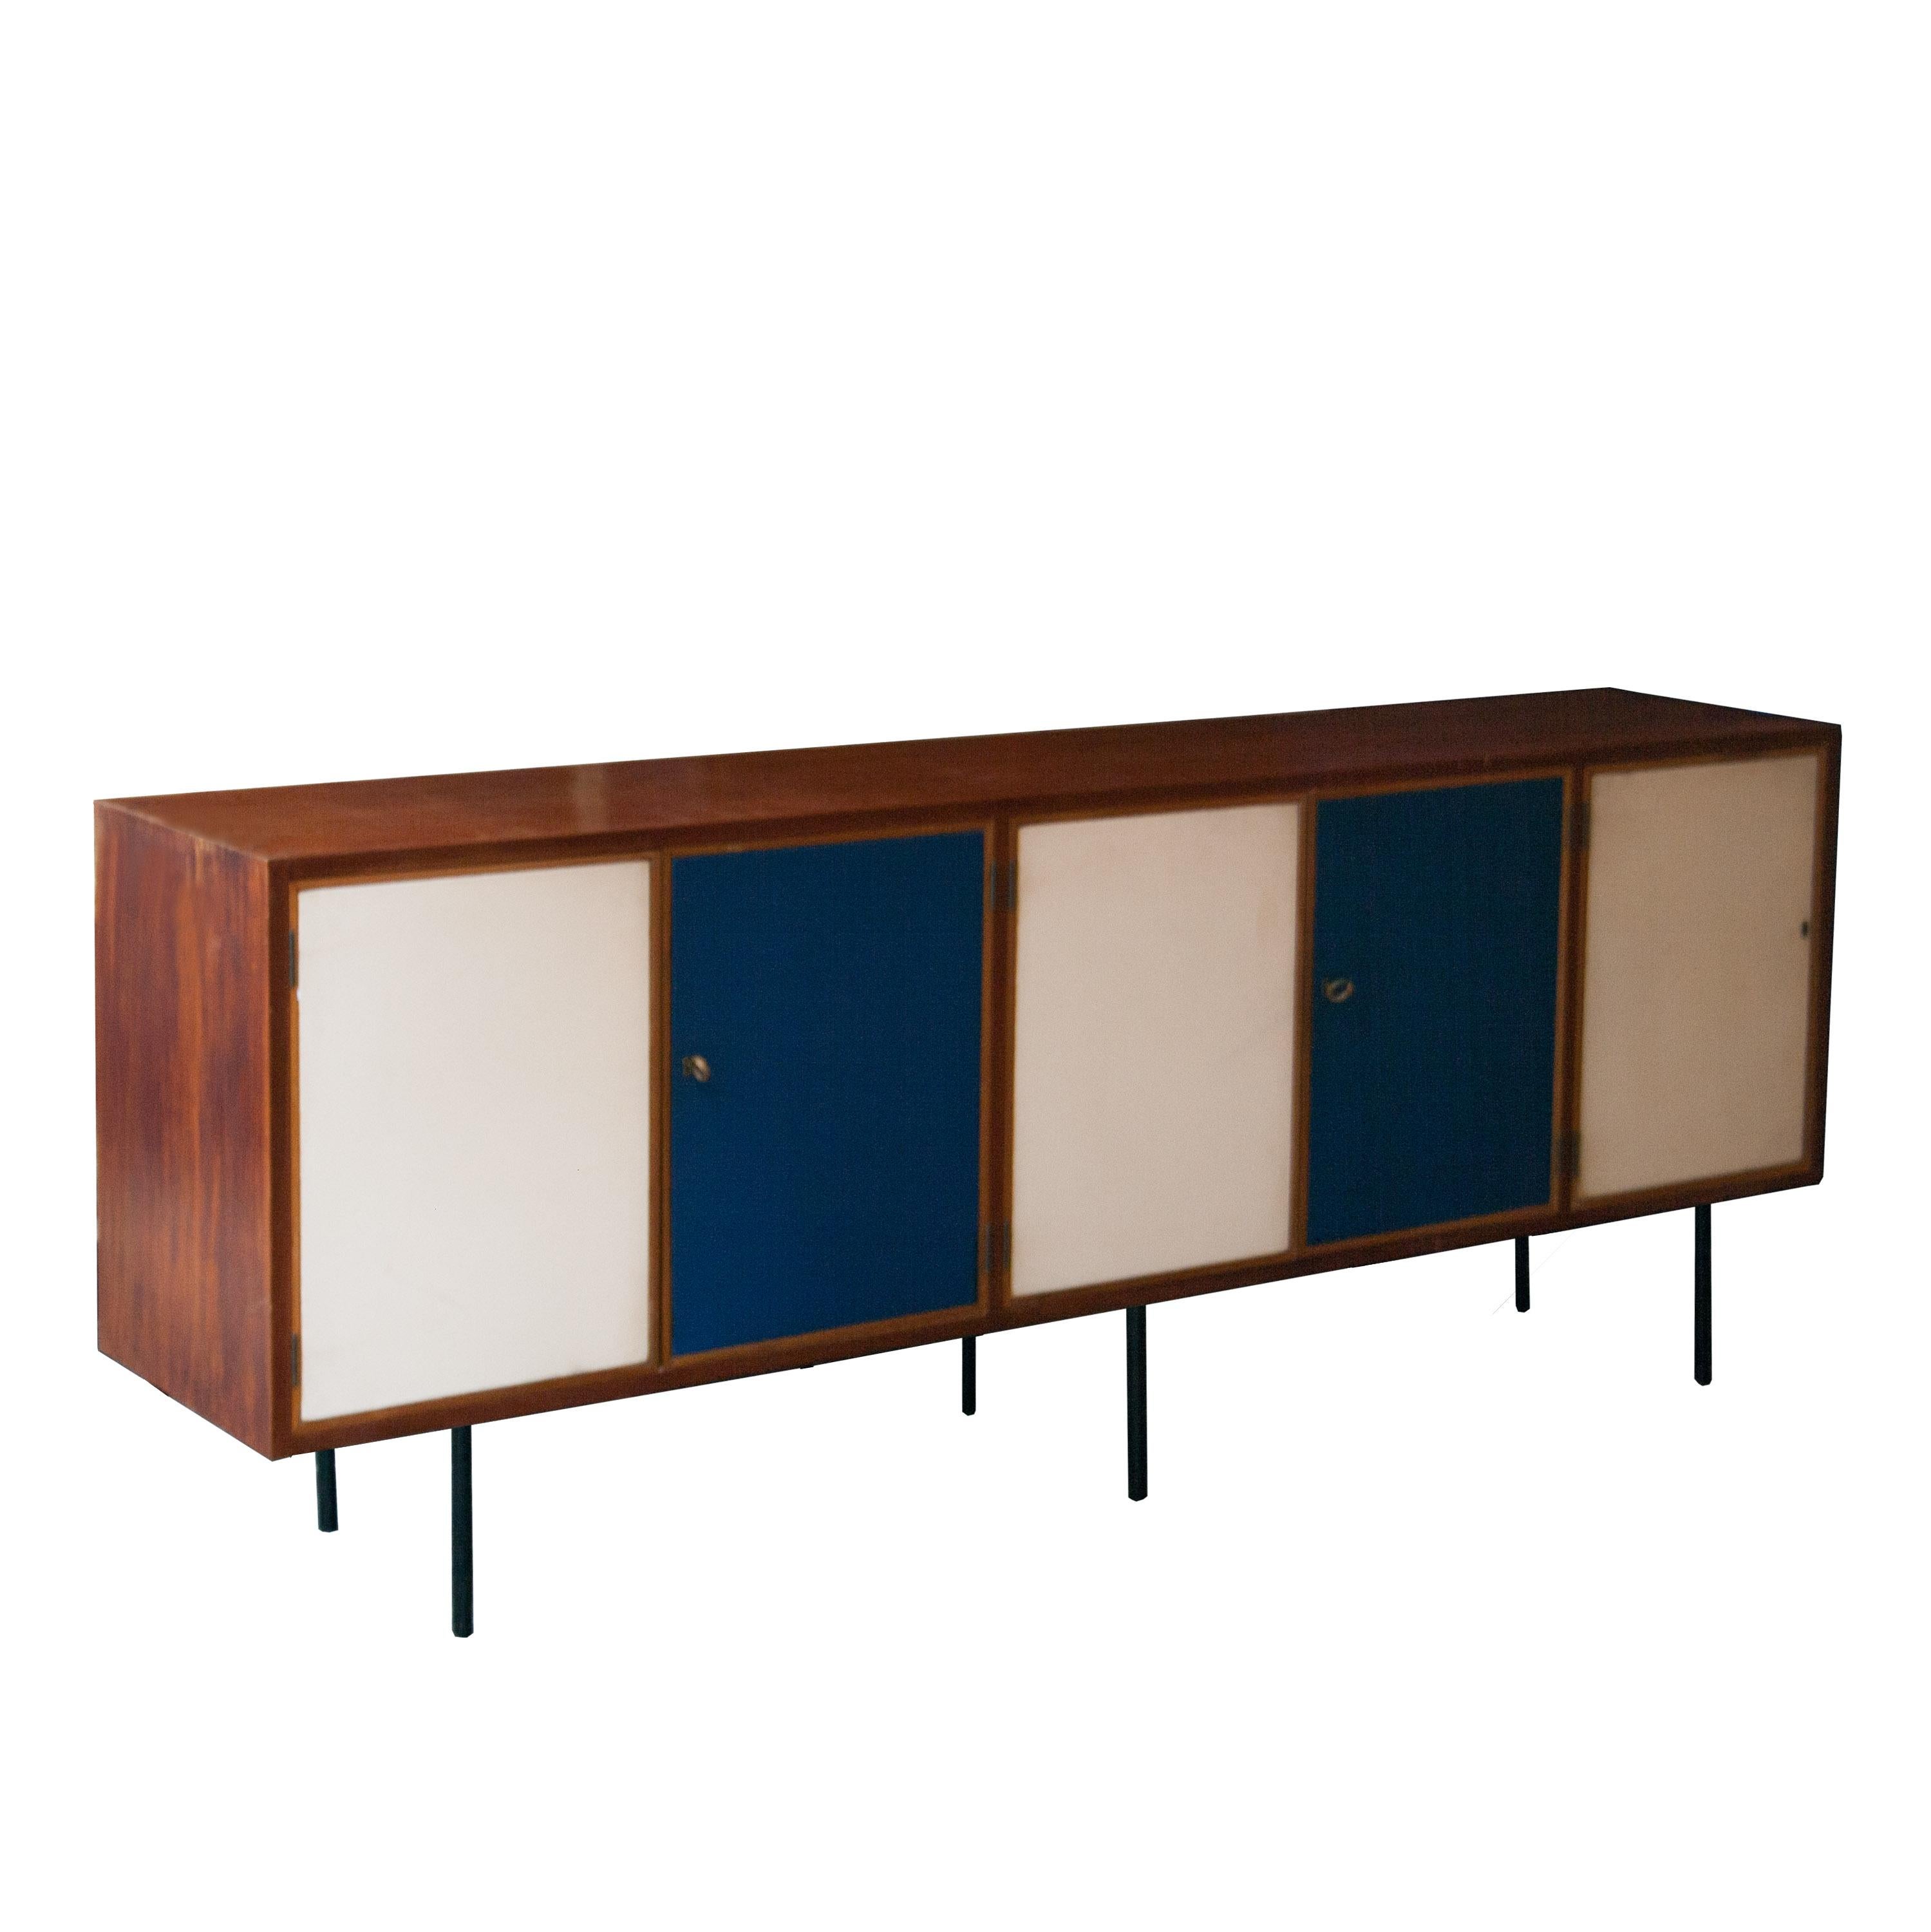 Midcentury sideboard made in mahogany. With five doors on the front, covered in blue and white leather, with wooden frames.
Black lacquered iron straight legs. Brass key and details.
 